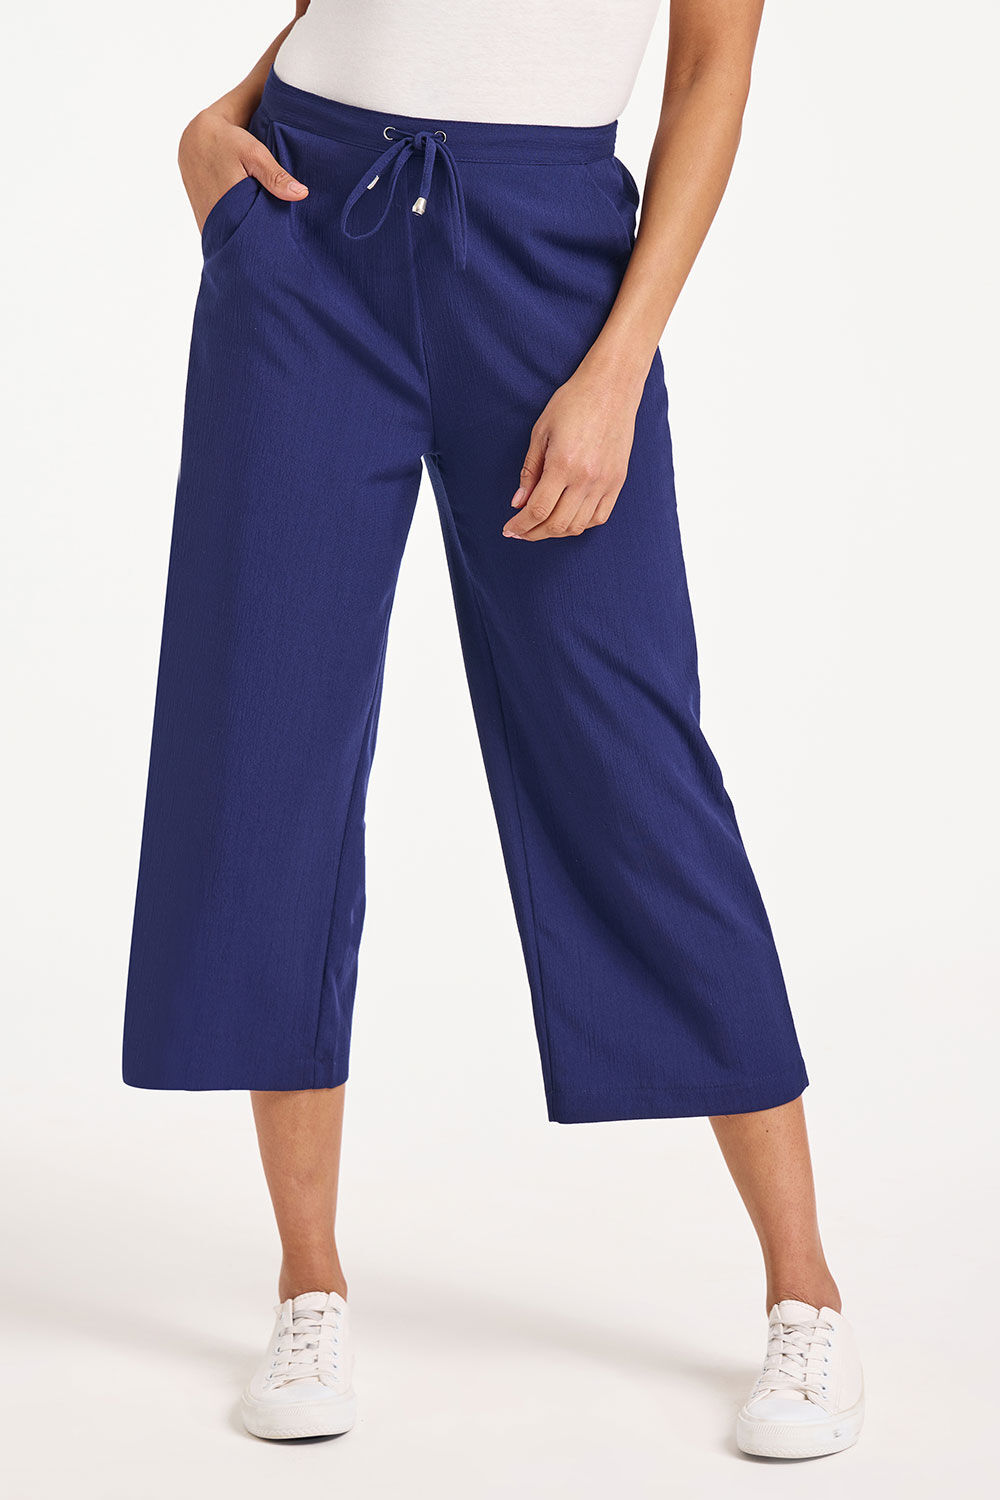 Bonmarche Navy Textured Wide Leg Elasticated Cropped Trousers, Size: 10